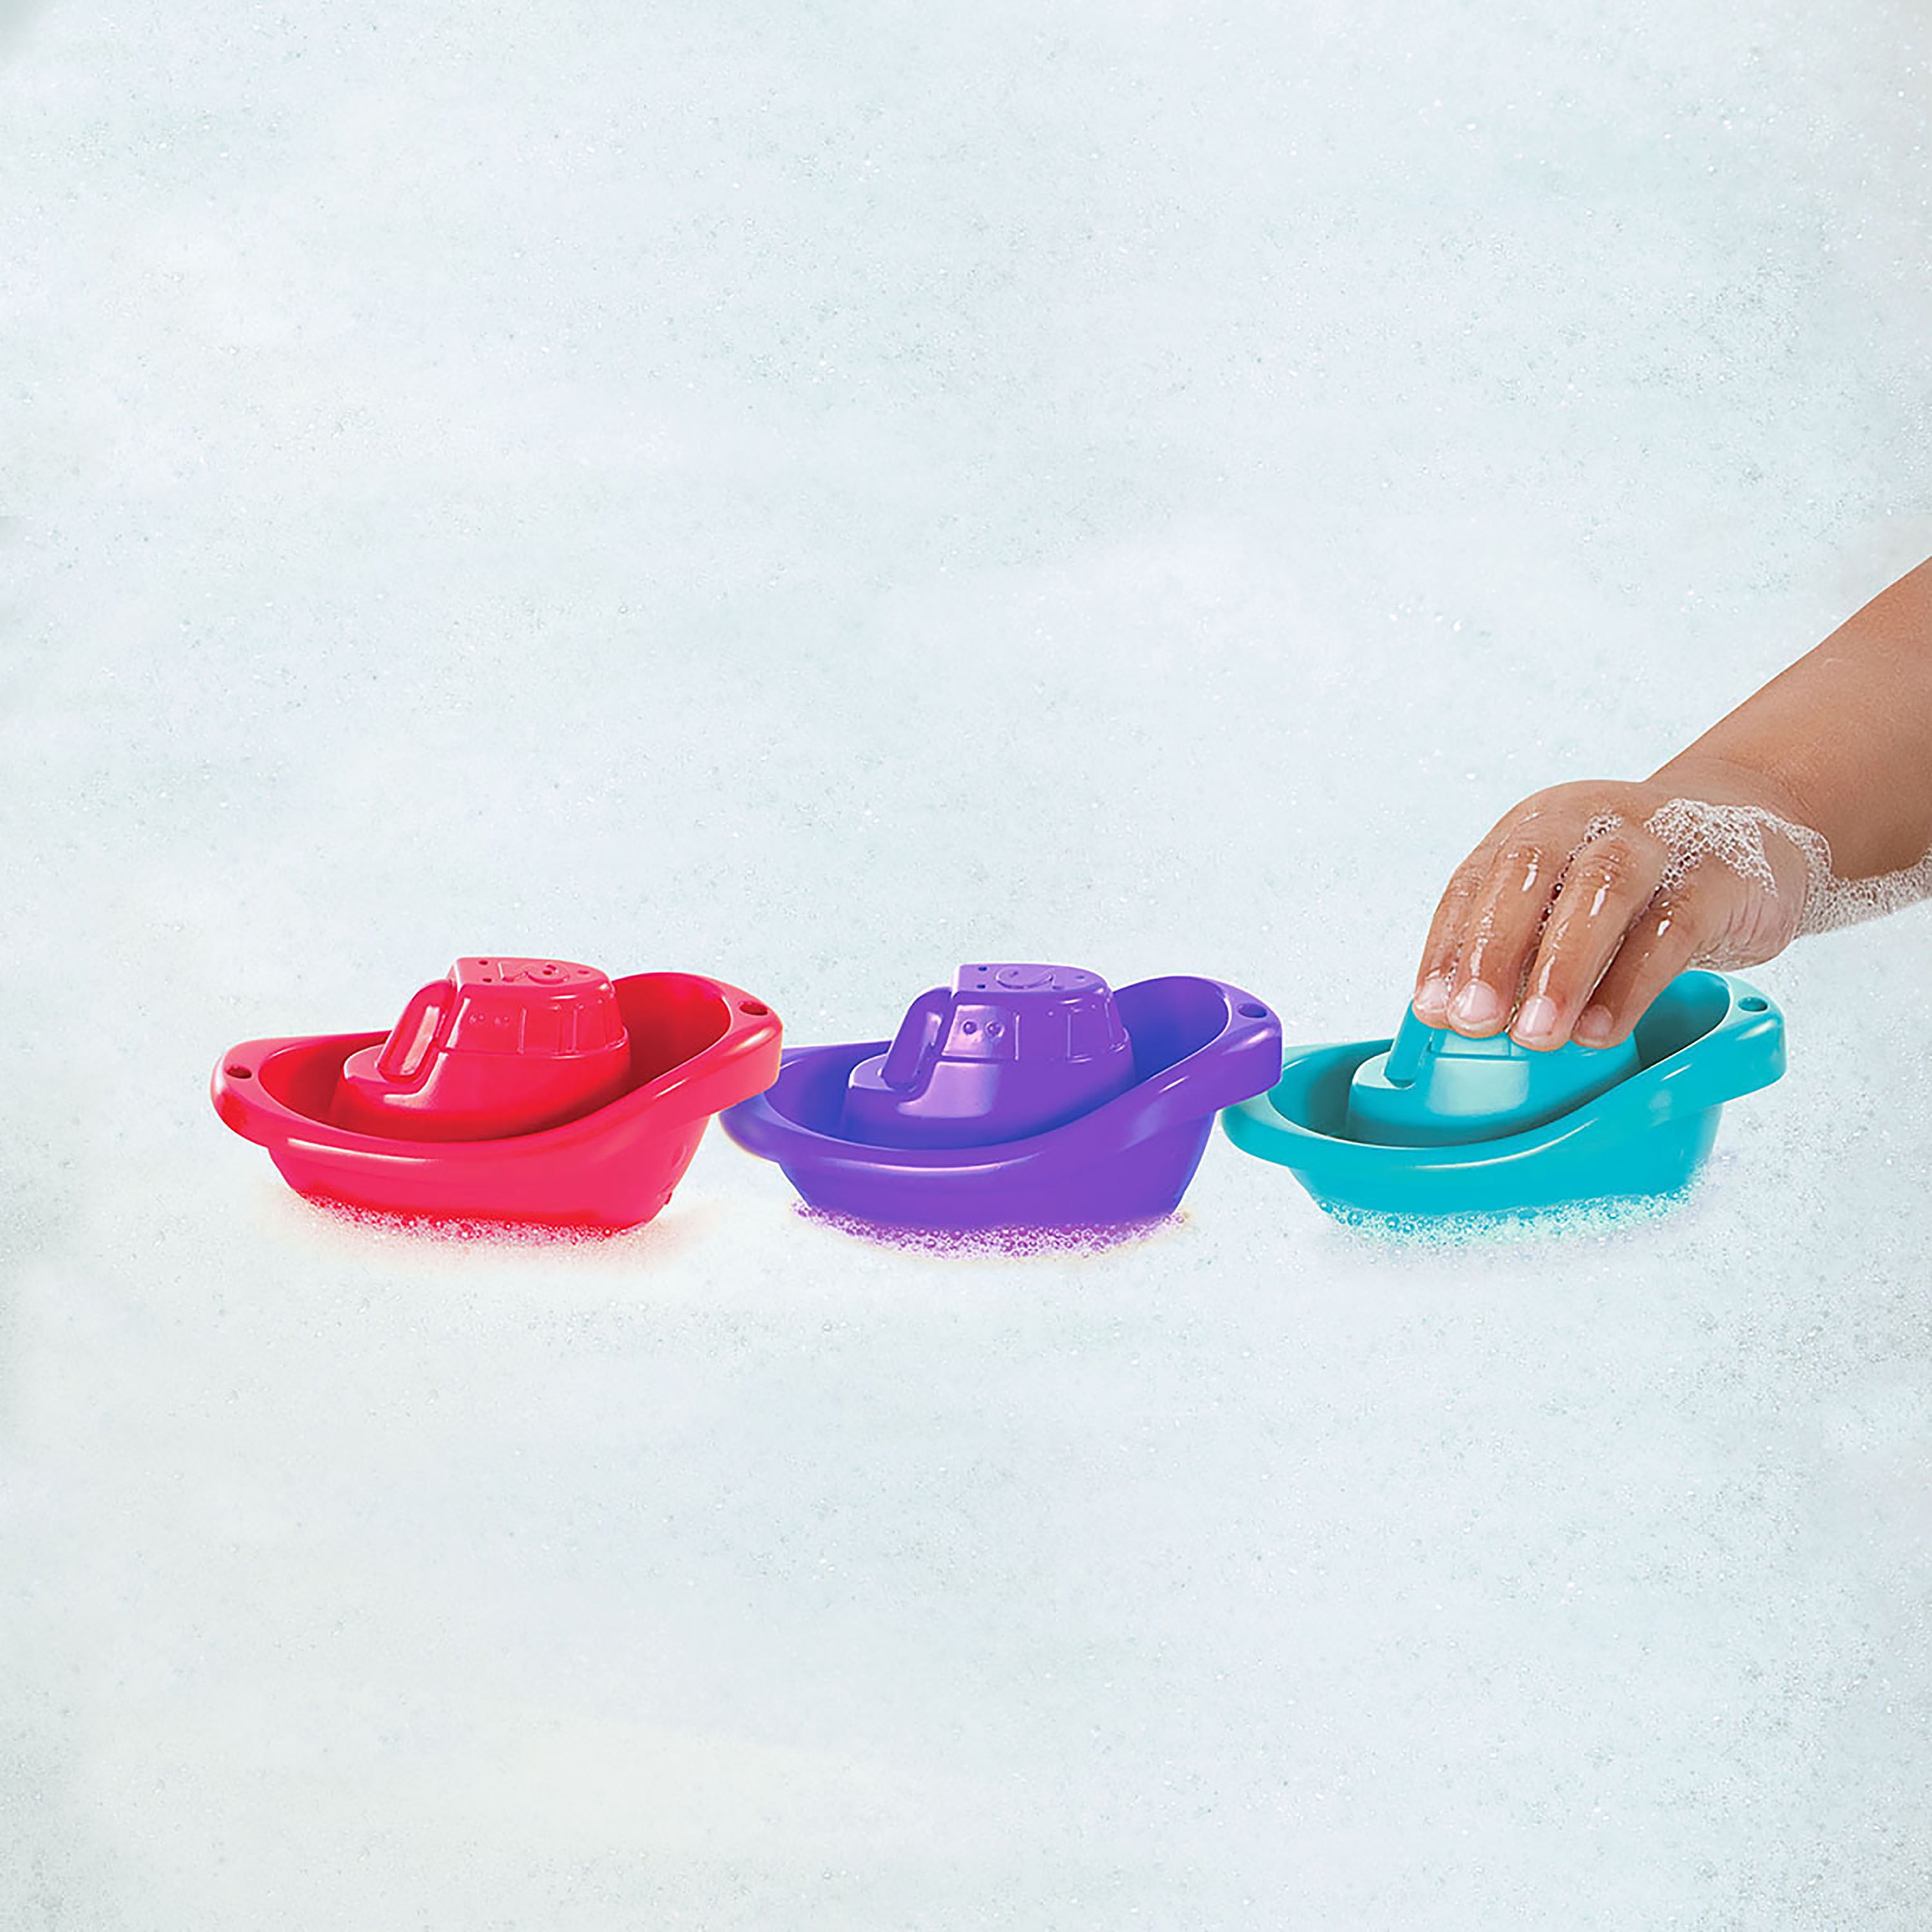 Baby Bath Toys Little Boat Train 6 Pcs Lightweight Easy Grasp Colorful Numbered 